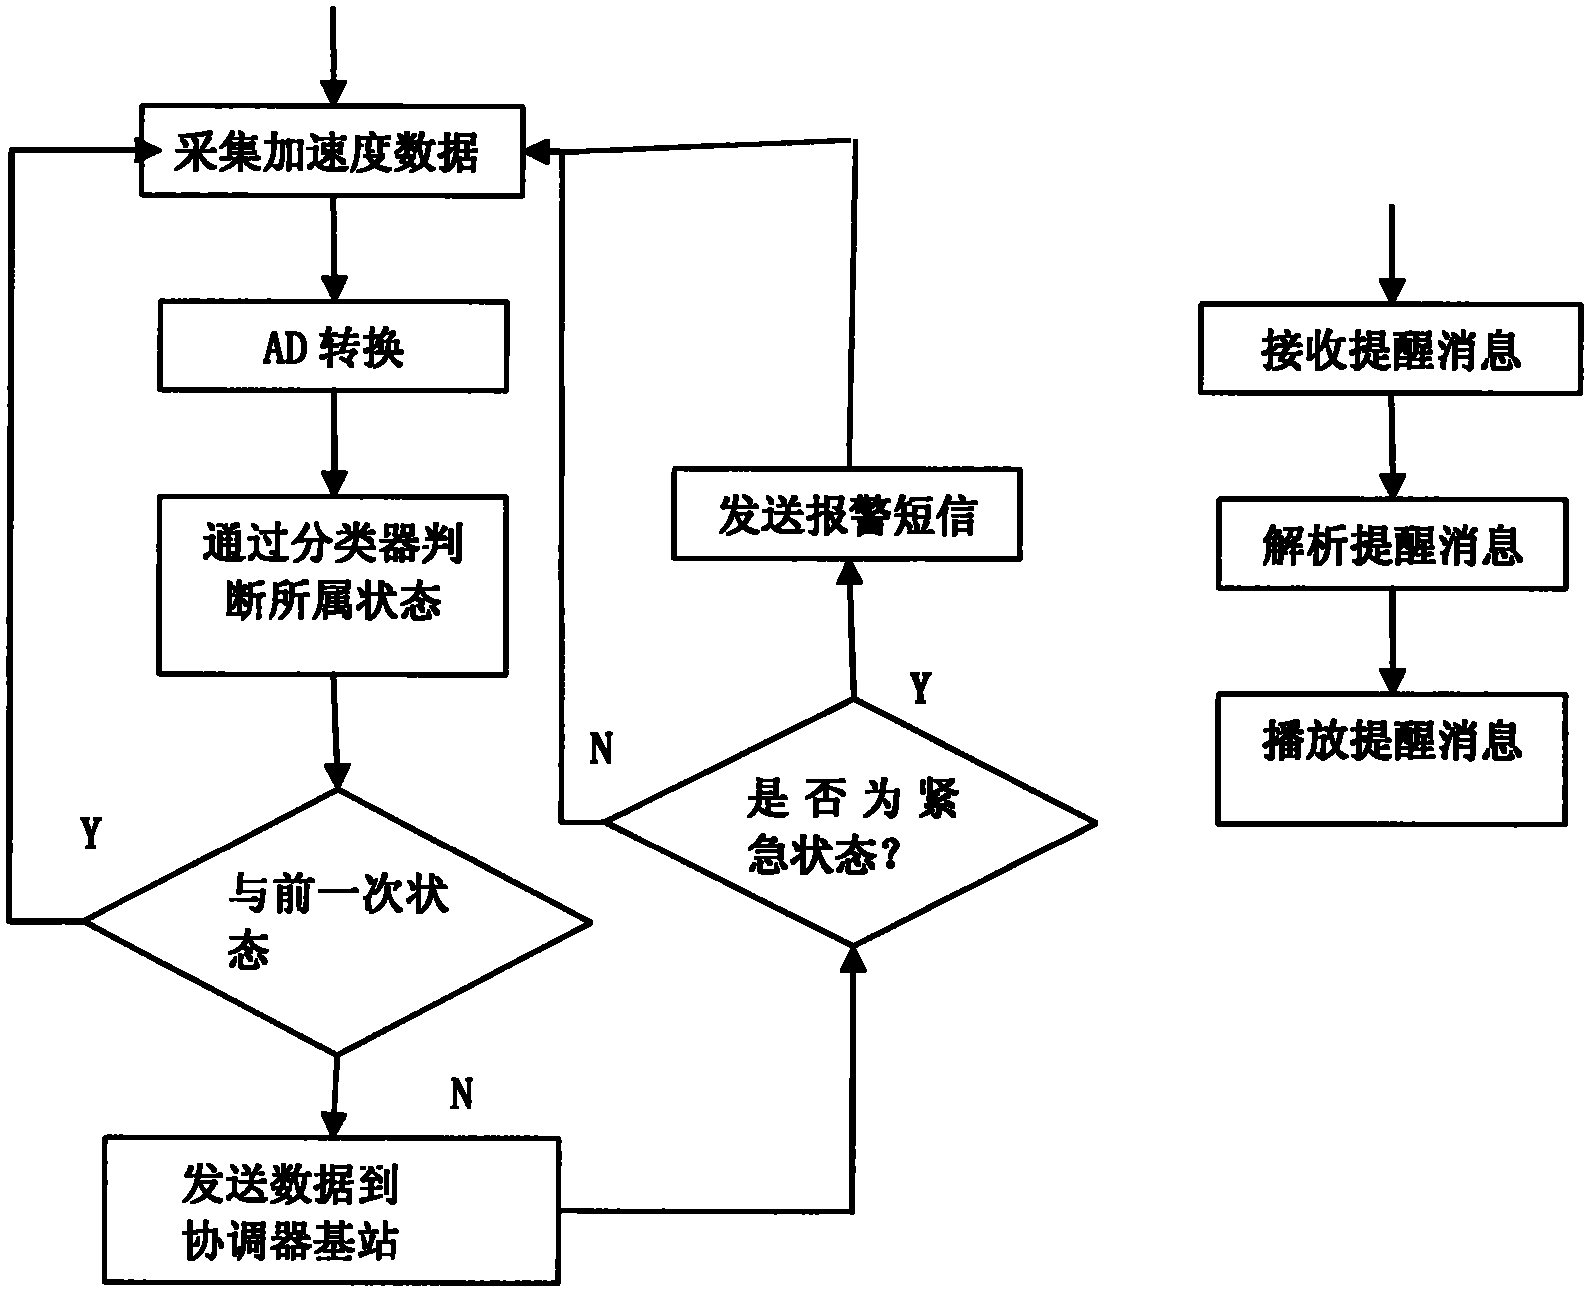 Physical condition monitoring device, safety alert monitoring system and safety alert monitoring method